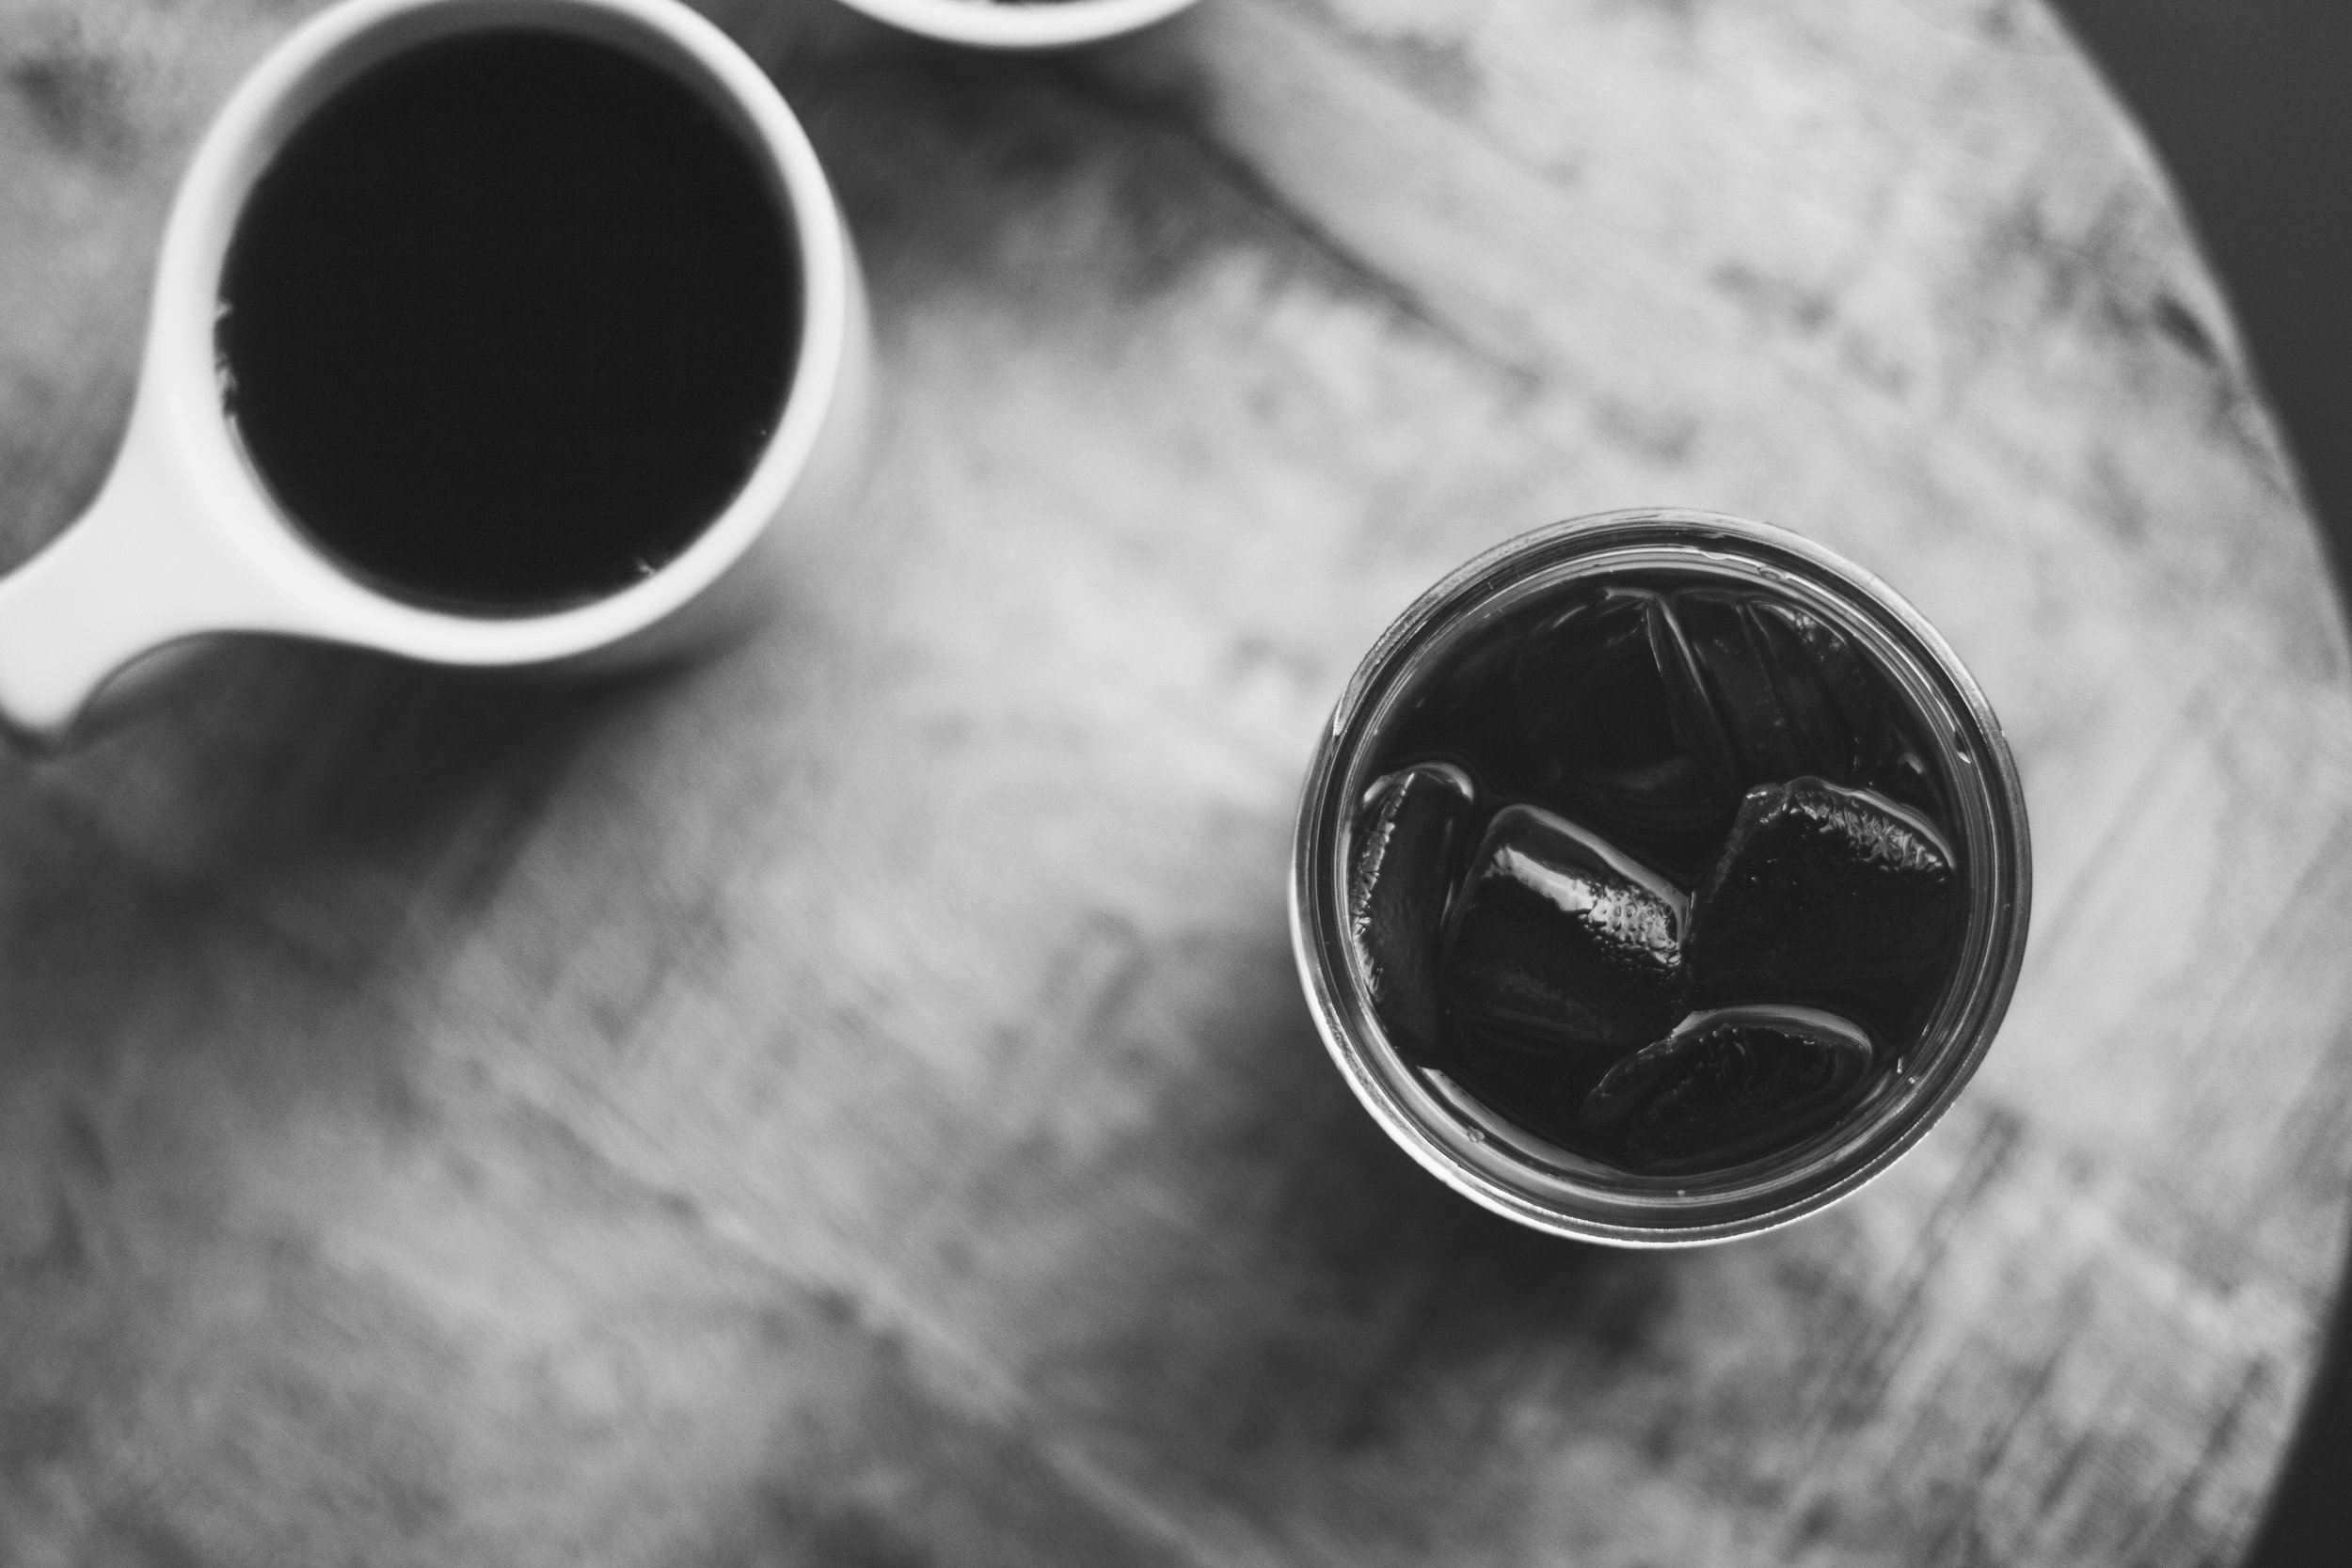 A cup of black coffee and a glass of iced coffee sit on a table, seen from above.